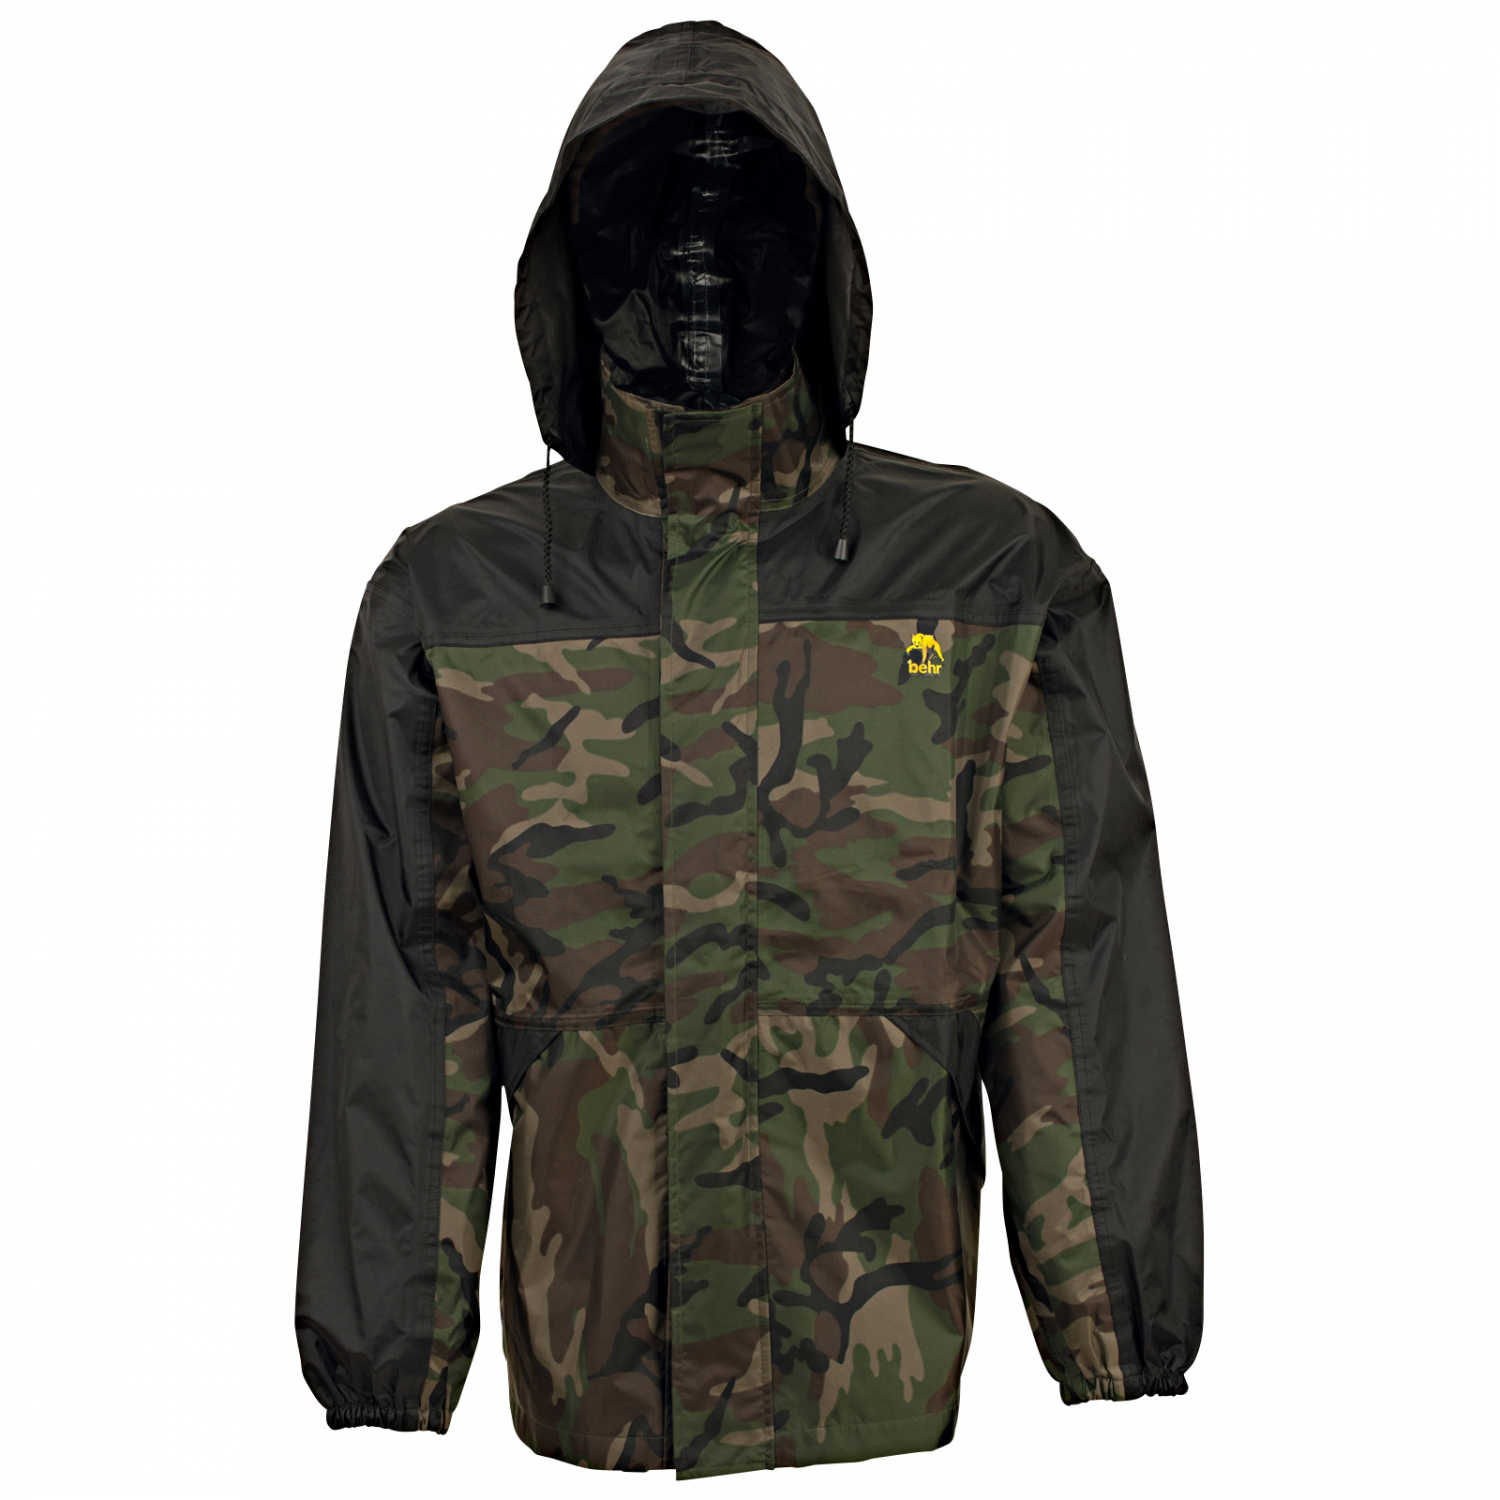 Behr Mens Rain Jacket Camou at low prices